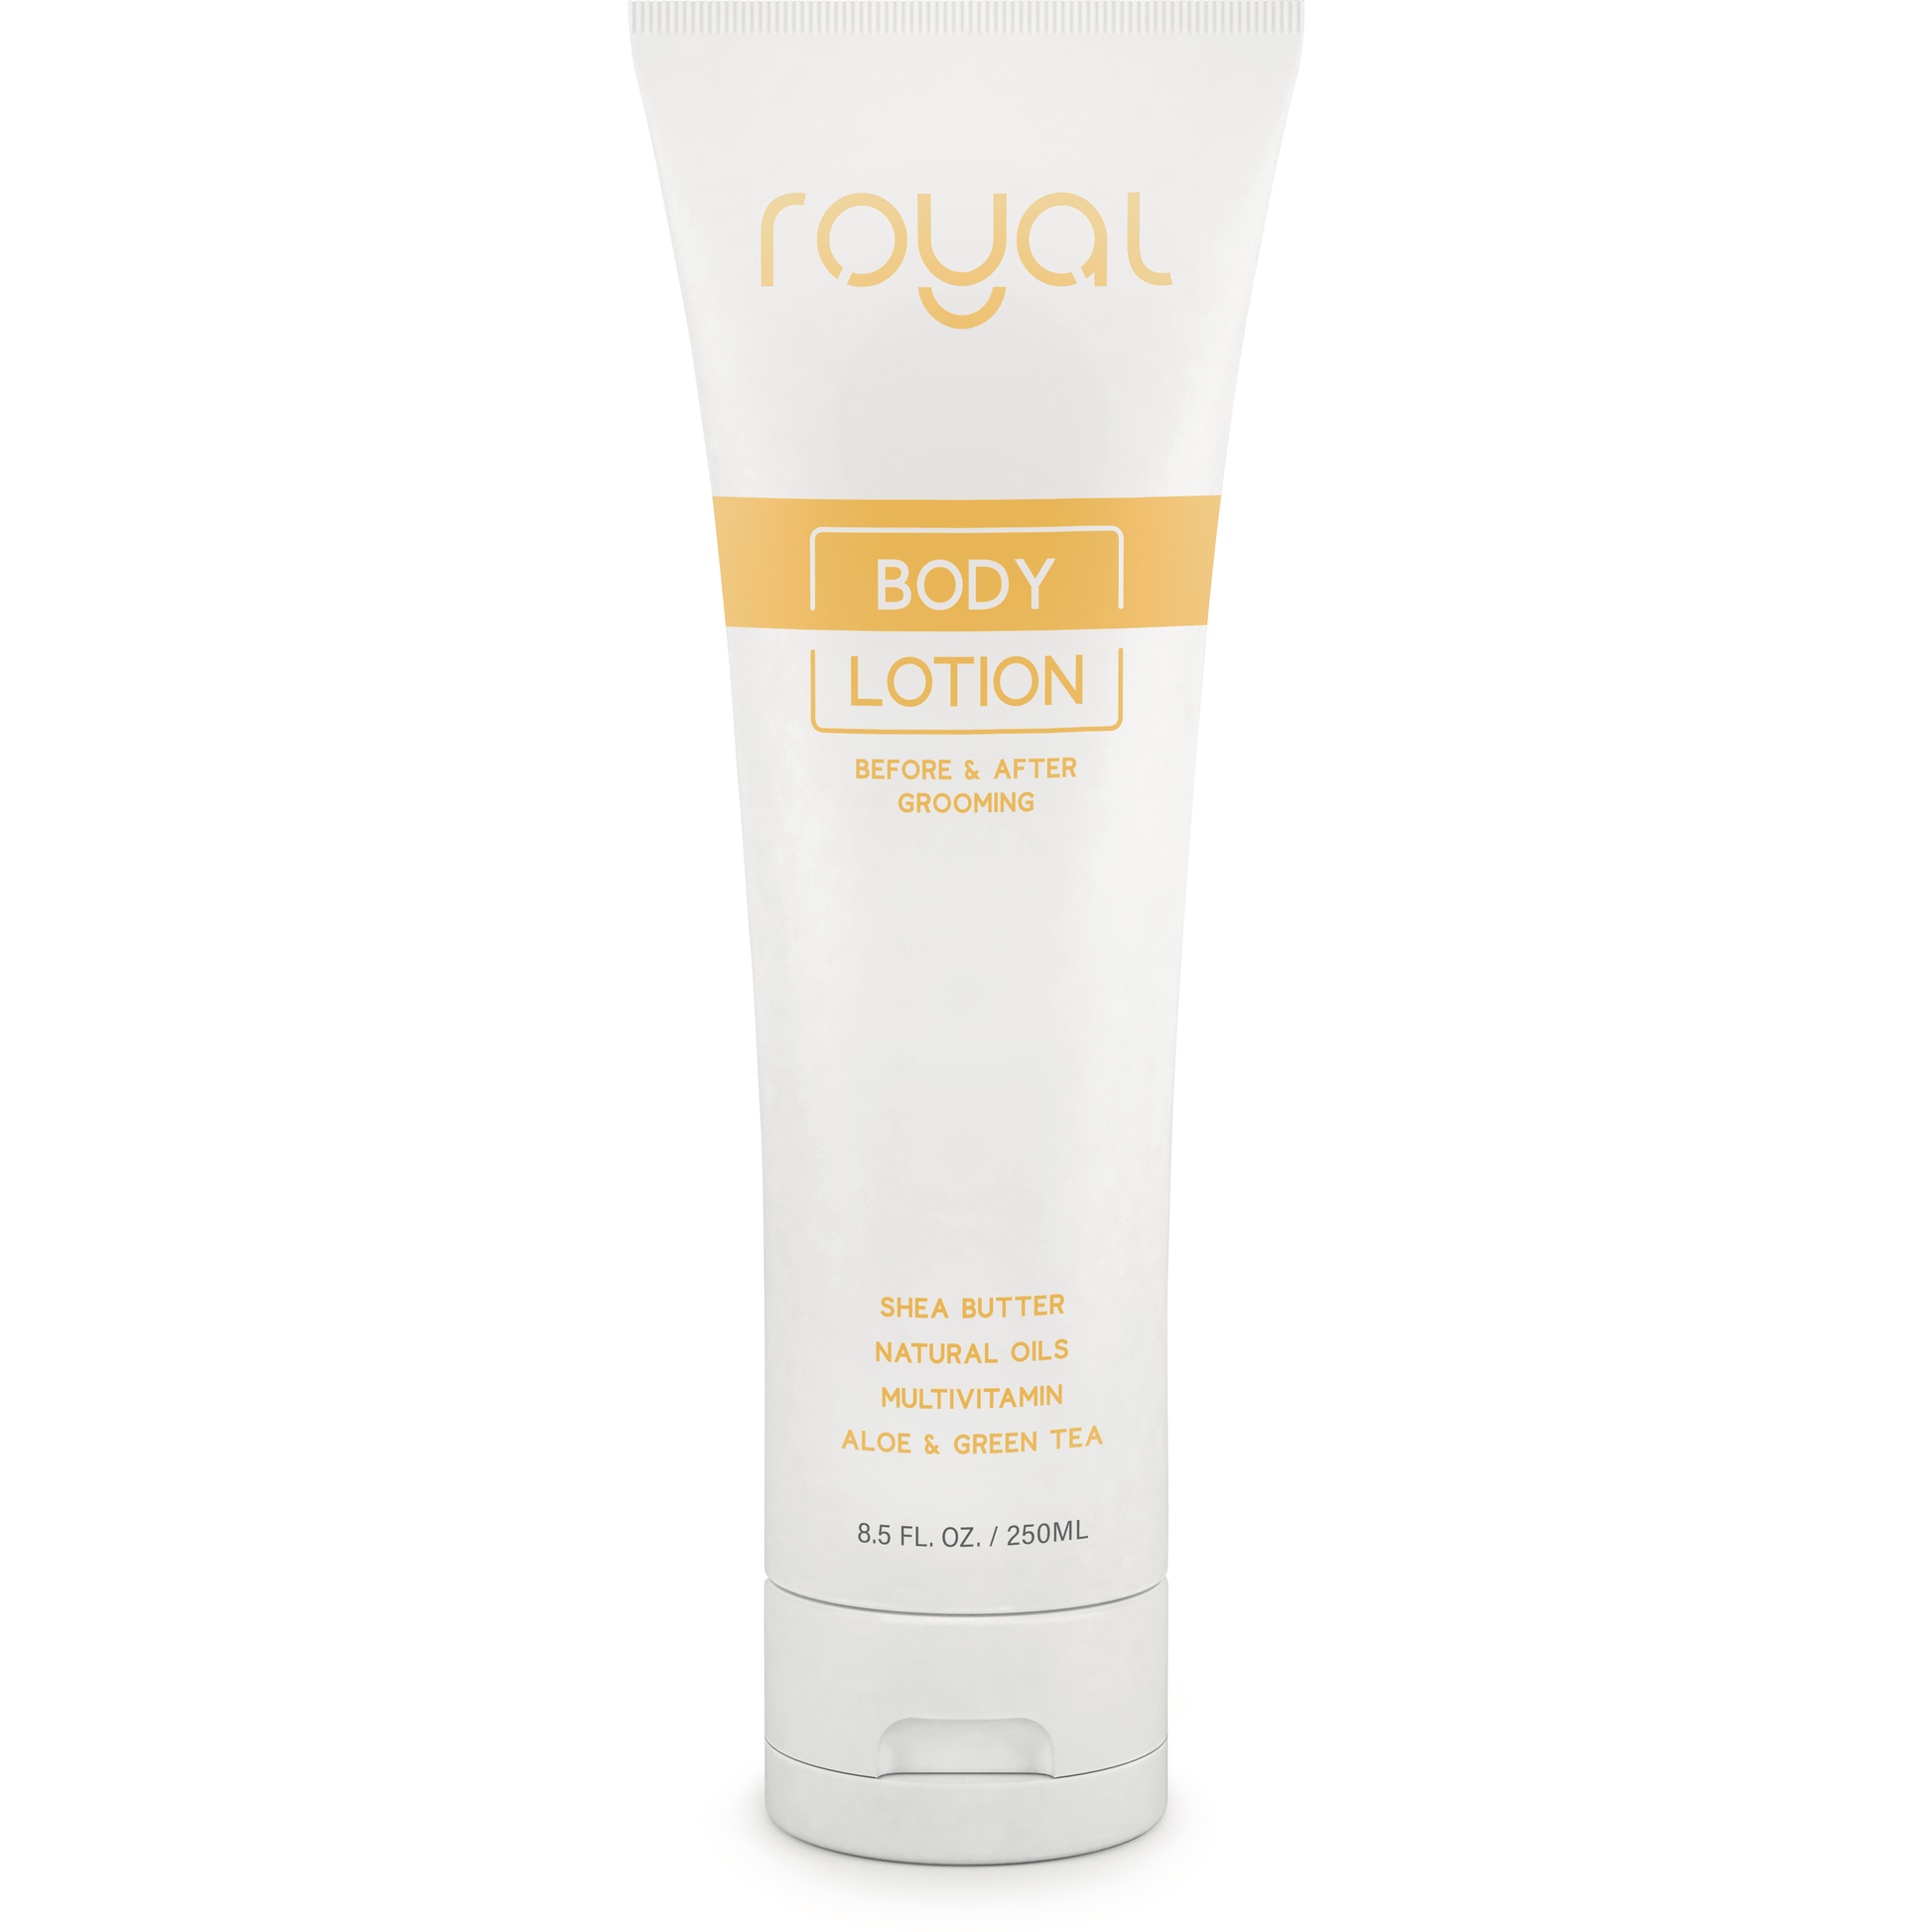 Intimate Grooming Lotion - Royal Intimacy